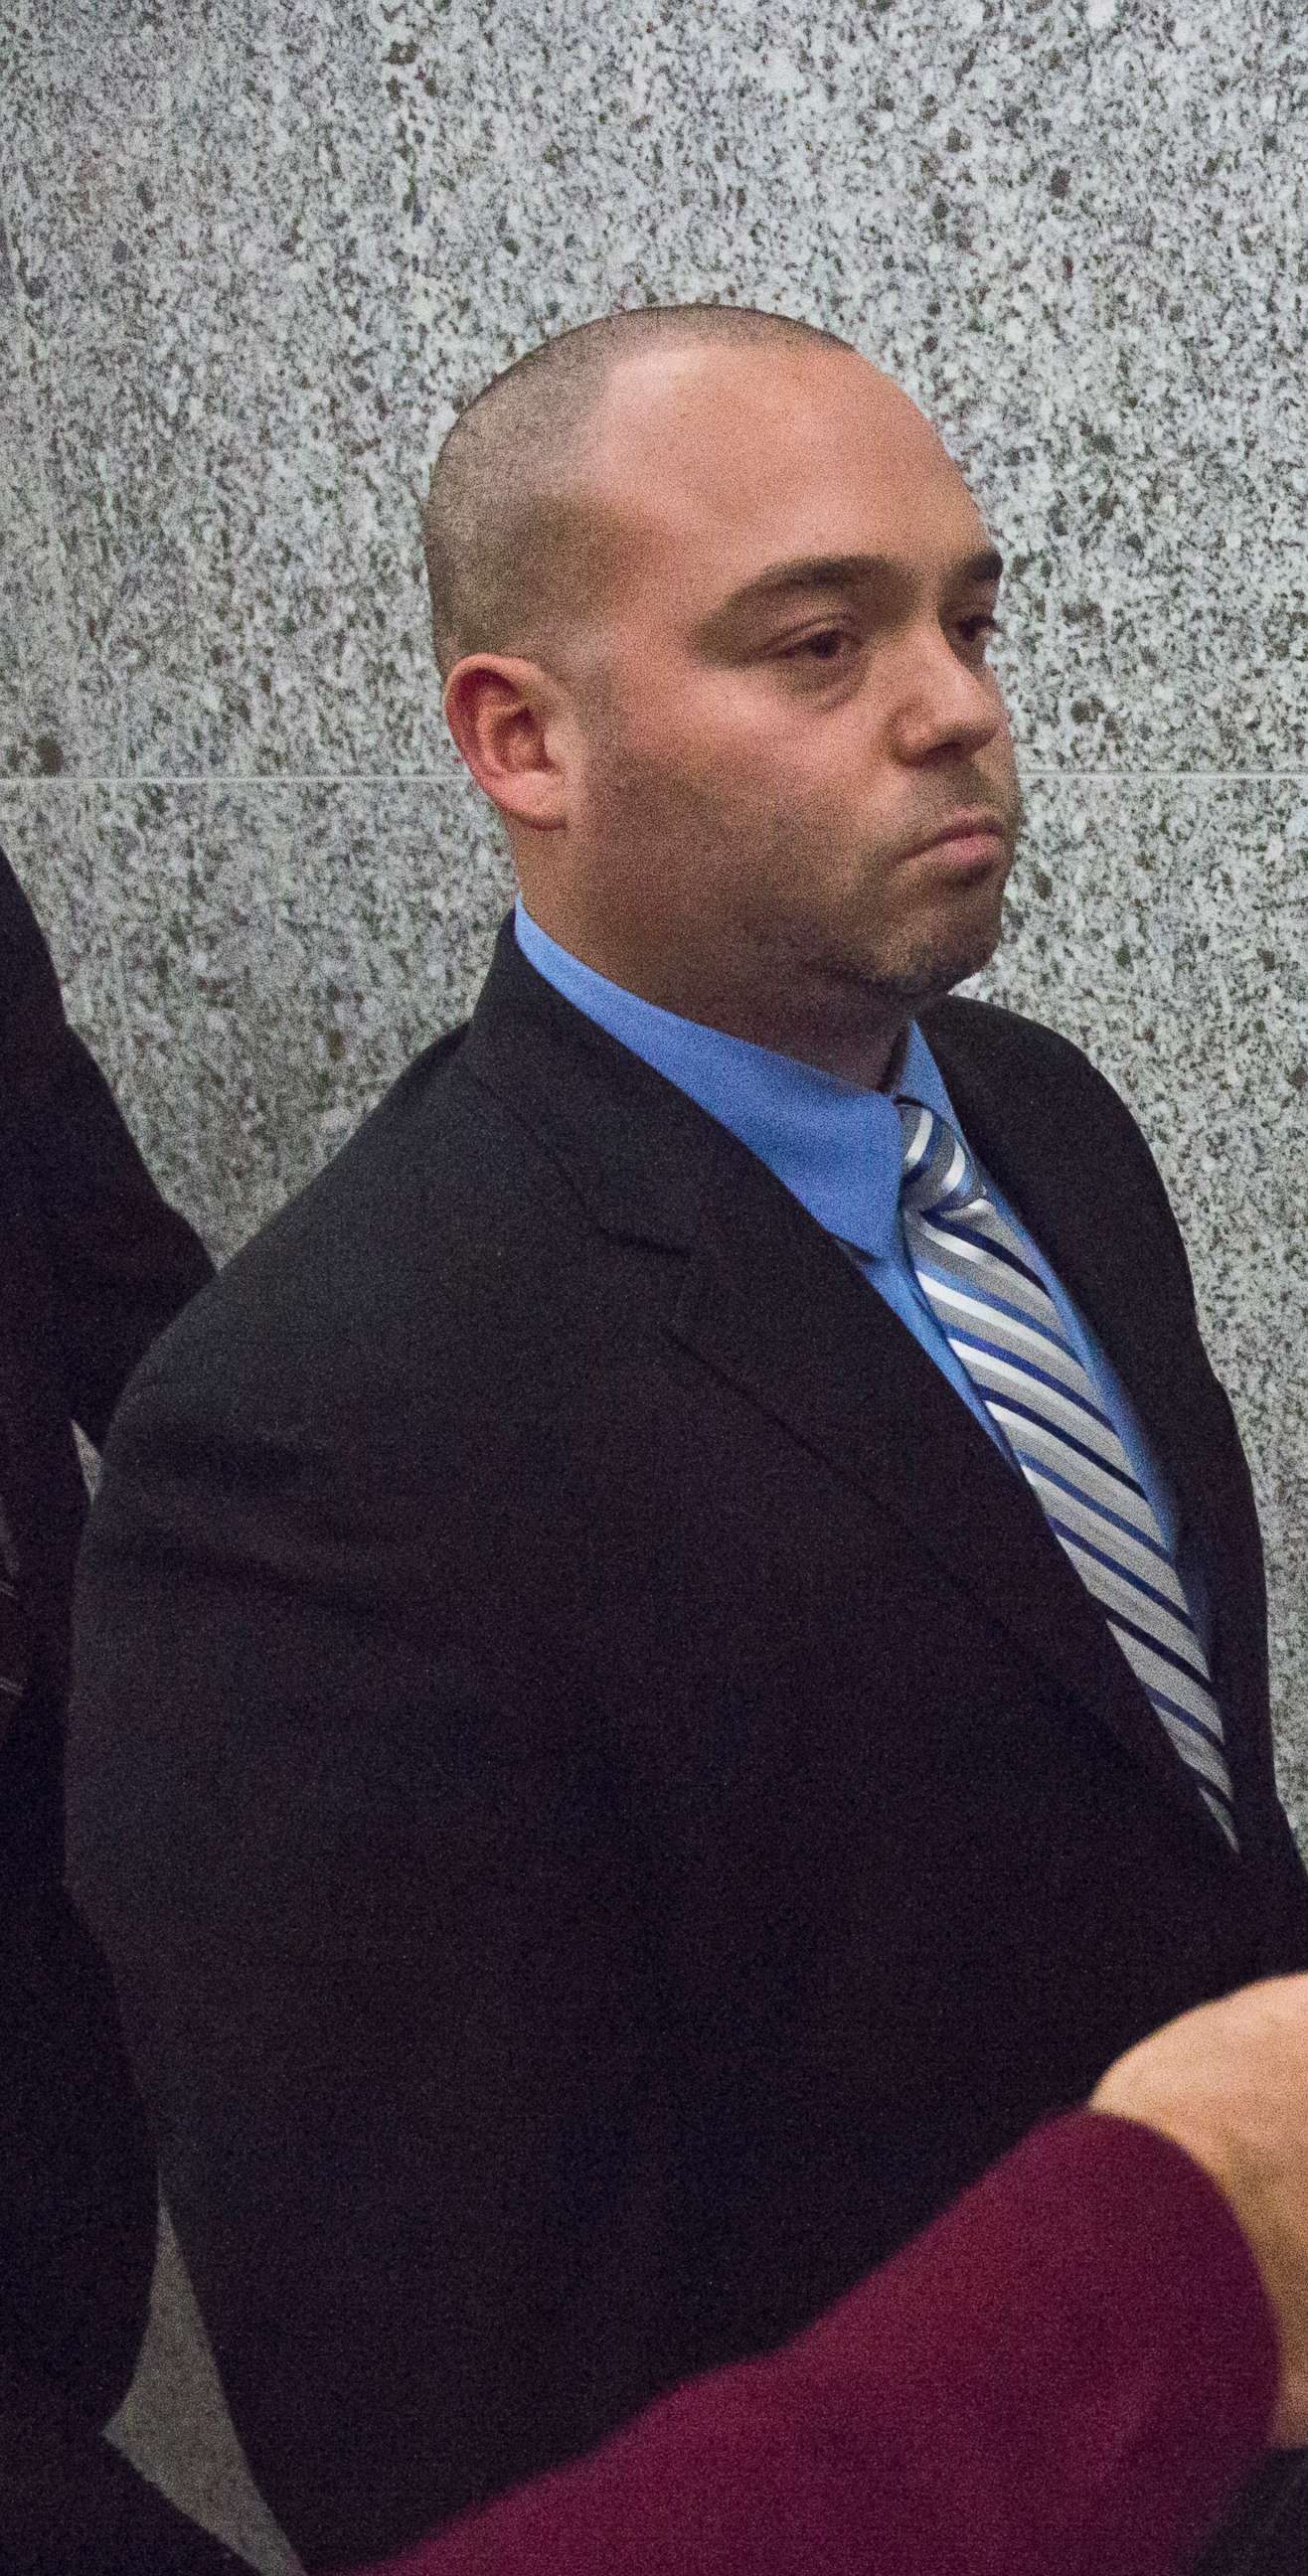 PHOTO: New York police officers David Afanador leaves state court following his arraignment in this Nov. 5, 2014 file photo in New York.